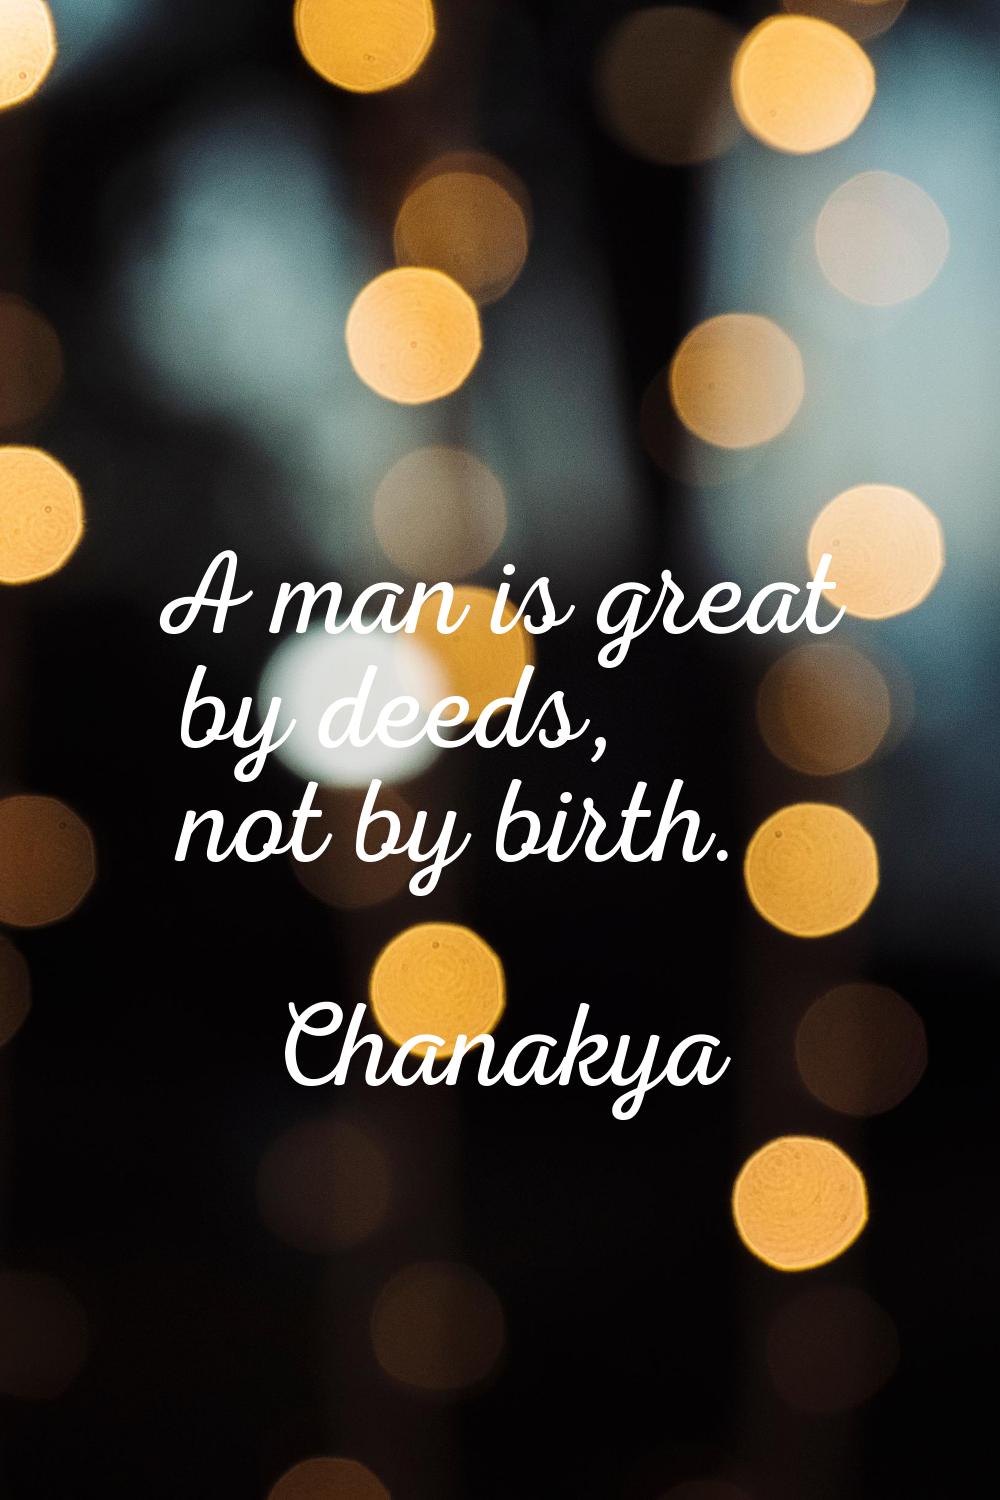 A man is great by deeds, not by birth.